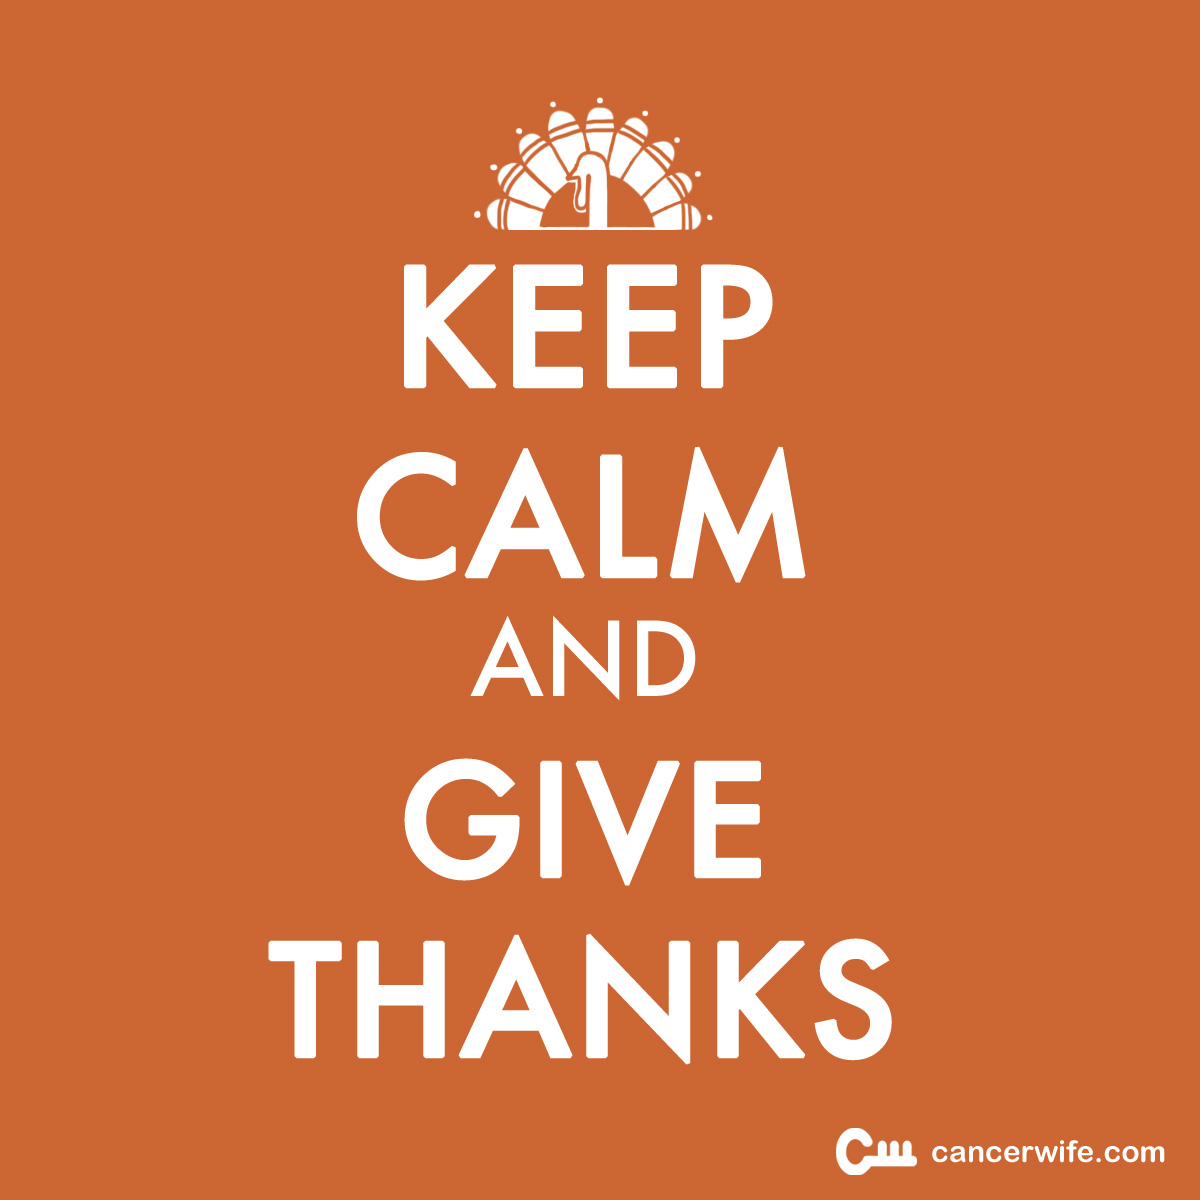 Keep calm and give thanks